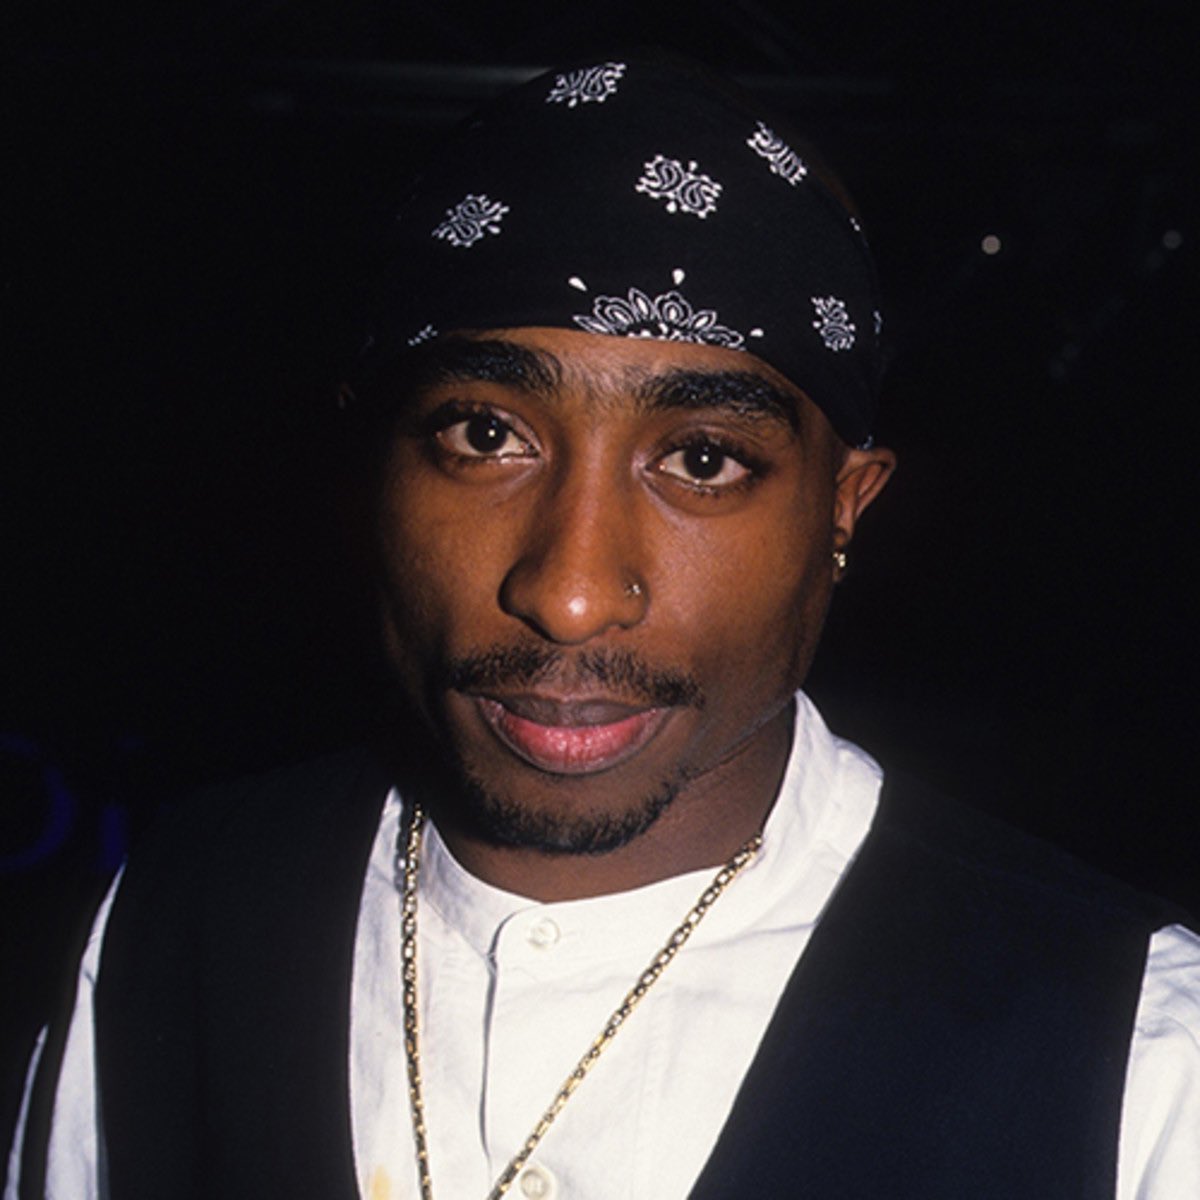 5: Tupac. I suppose you could call this part of the “face of hip hop” being arguably the most popular rapper and setting the standard for east coast rap. But not only was his lyrical ability amazing but also his substance. He was able to rap about numerous different things and-